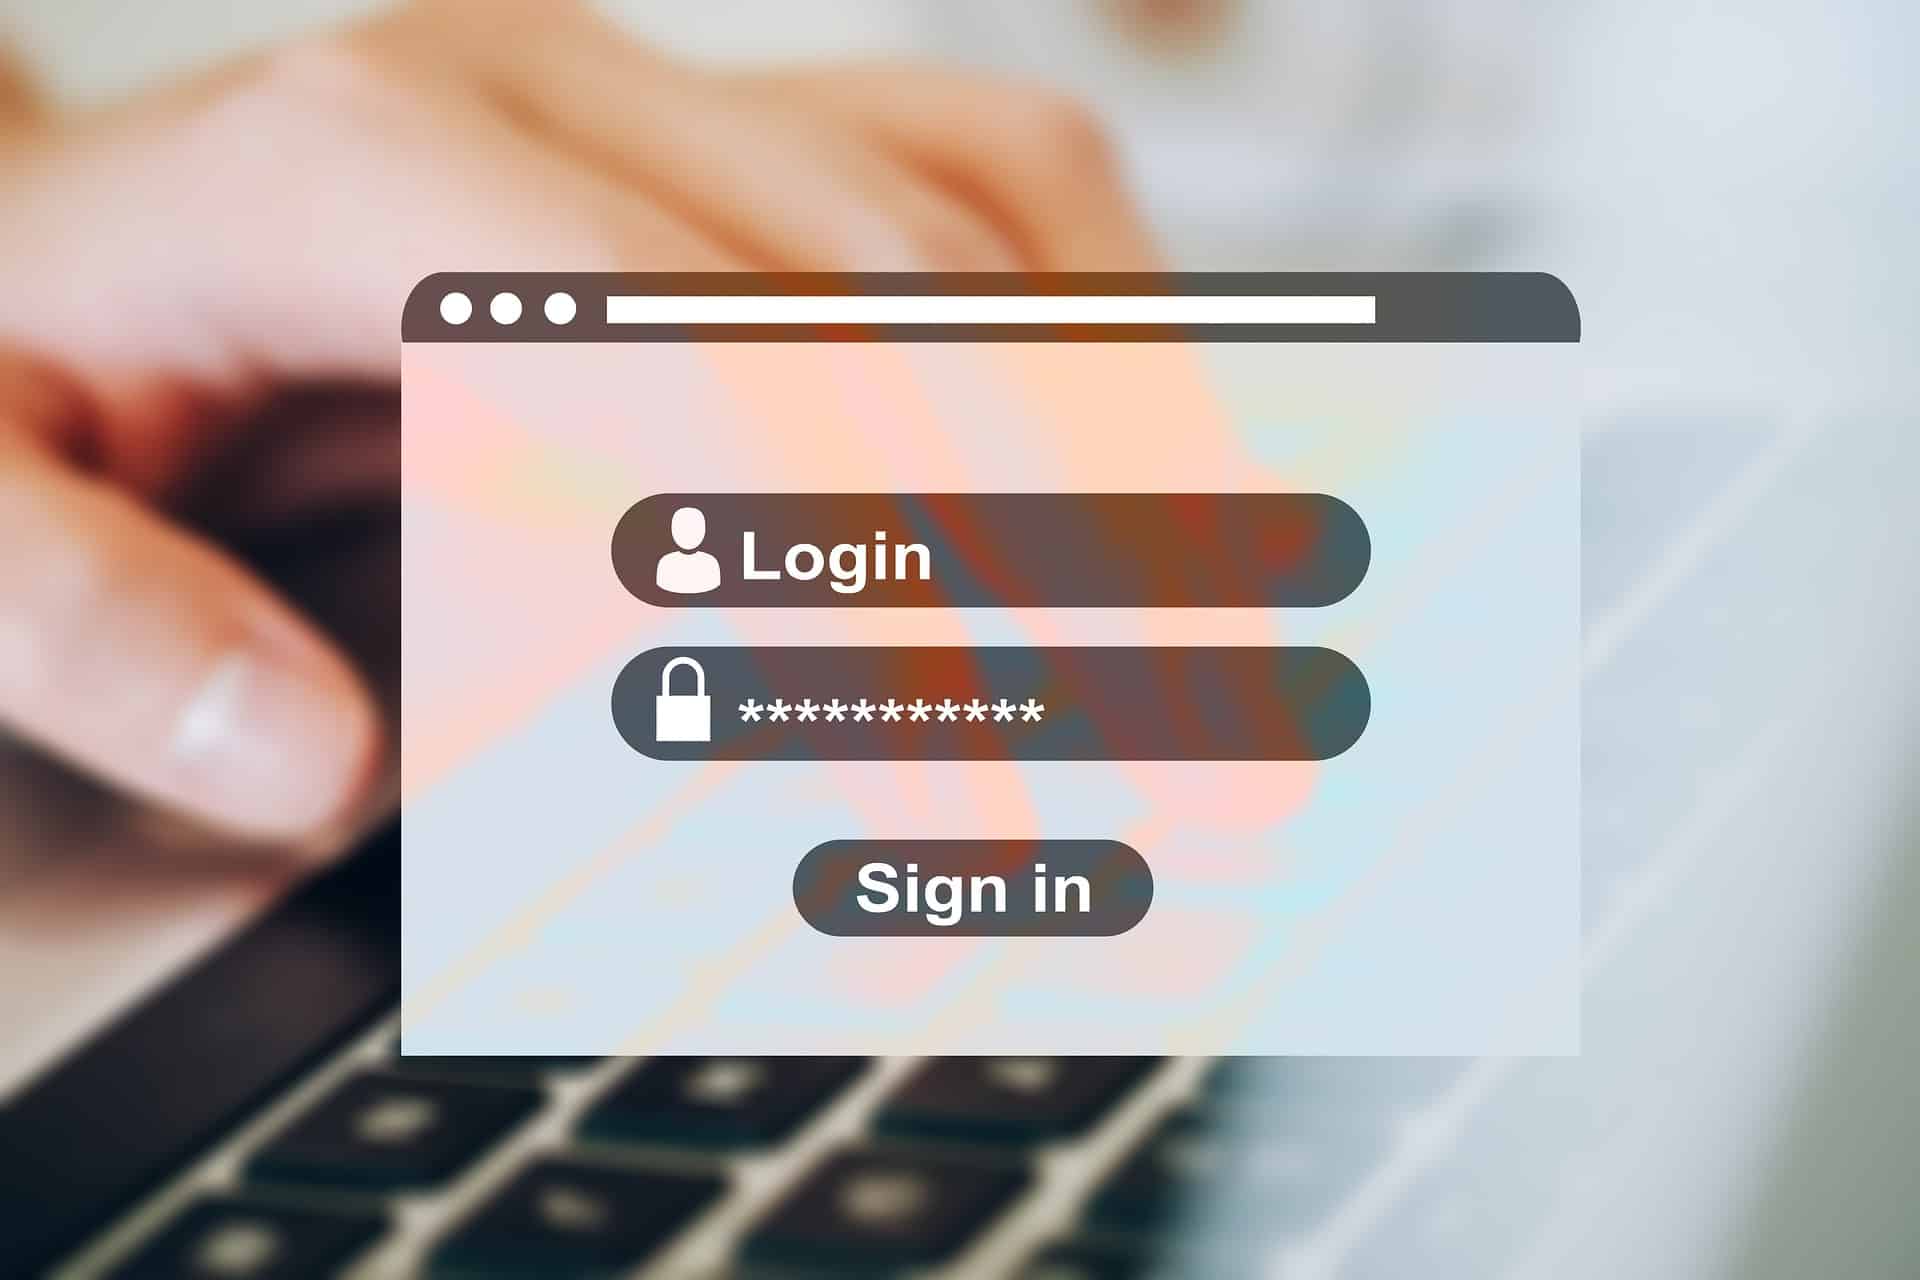 Login screen showing username and password